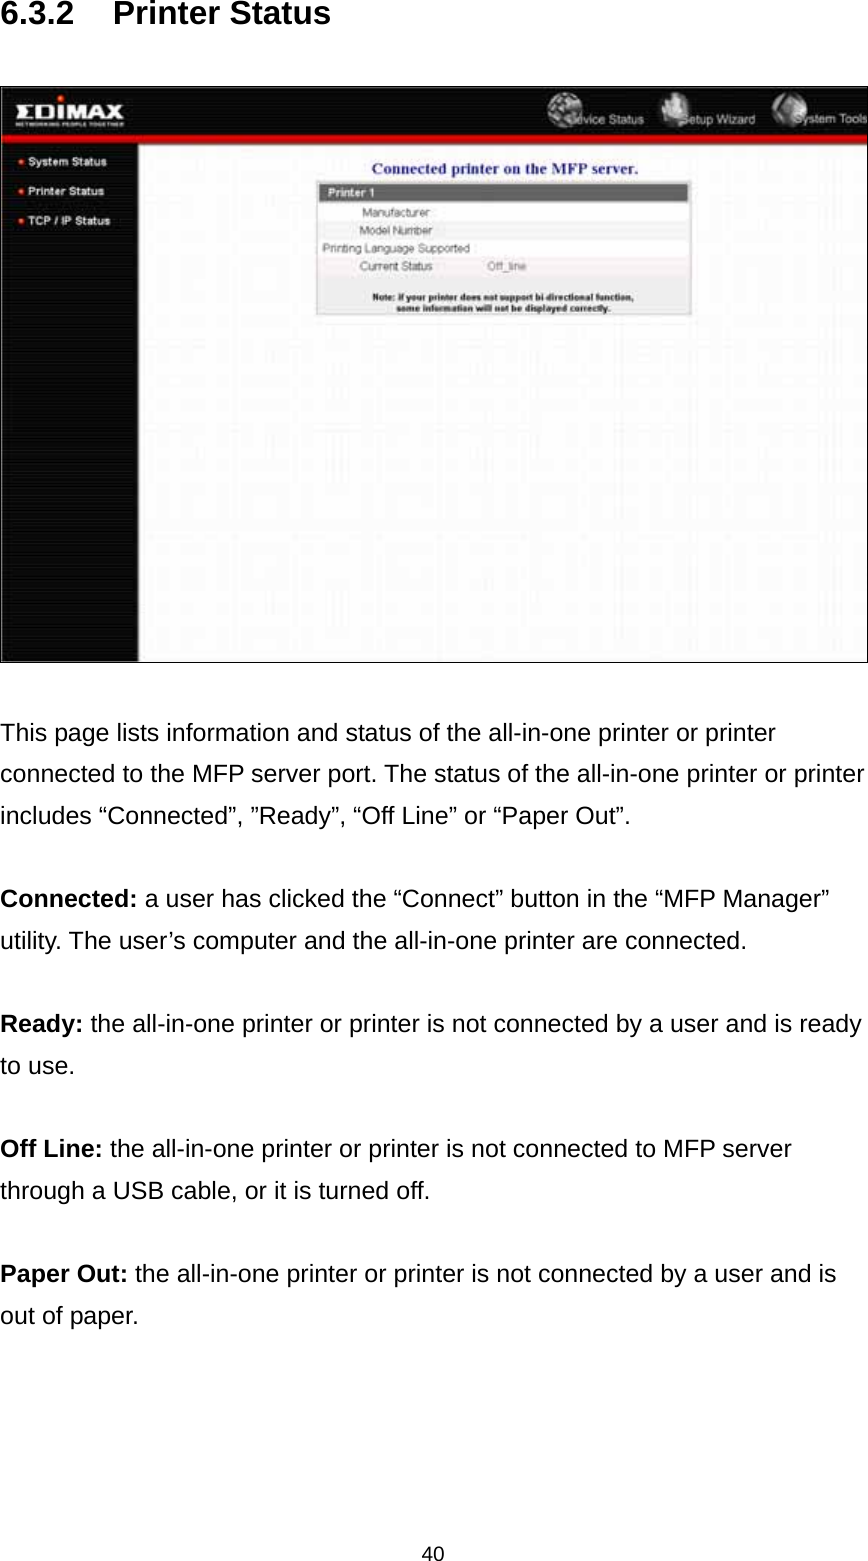 40 6.3.2 Printer Status    This page lists information and status of the all-in-one printer or printer connected to the MFP server port. The status of the all-in-one printer or printer includes “Connected”, ”Ready”, “Off Line” or “Paper Out”.  Connected: a user has clicked the “Connect” button in the “MFP Manager” utility. The user’s computer and the all-in-one printer are connected.  Ready: the all-in-one printer or printer is not connected by a user and is ready to use.  Off Line: the all-in-one printer or printer is not connected to MFP server through a USB cable, or it is turned off.  Paper Out: the all-in-one printer or printer is not connected by a user and is out of paper.    